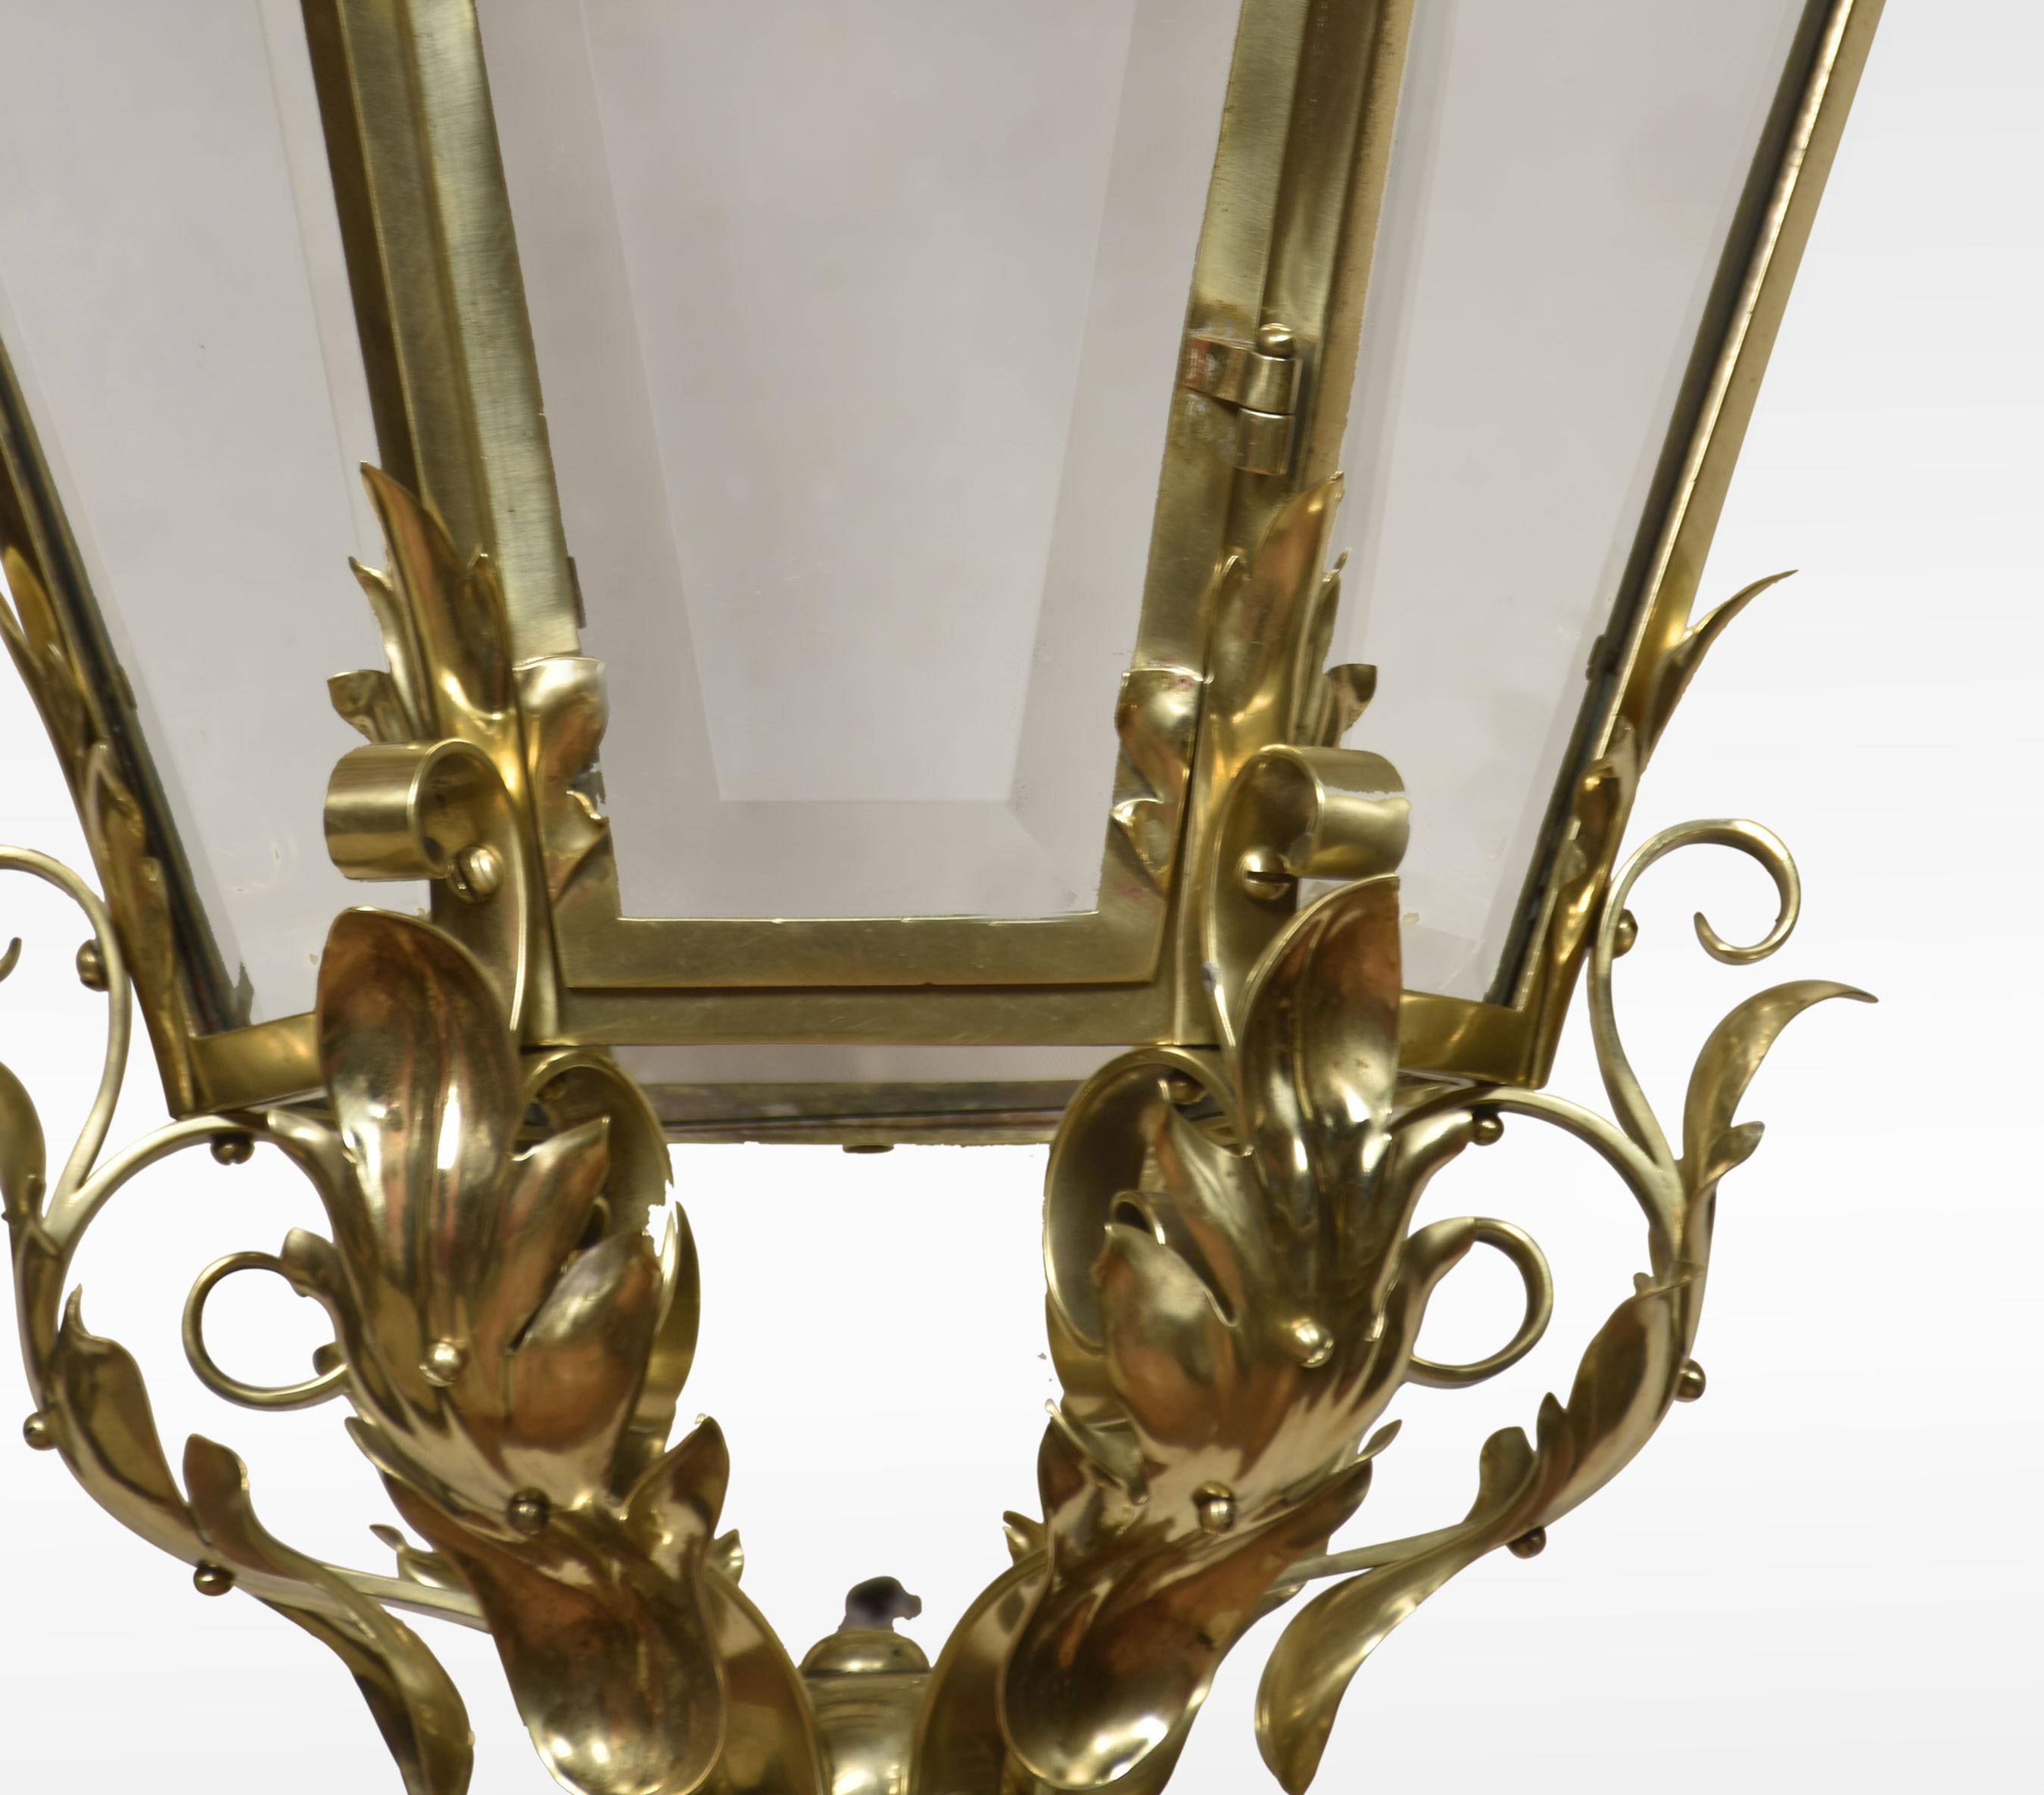 Large and imposing brass four-light lantern of hexagonal form the bevelled glass panels enclosed in frame with leaf crestings and scrolling detail. The central four lights have been rewired and tested.
Dimensions
Height 37.5 Inches
Width 20.5